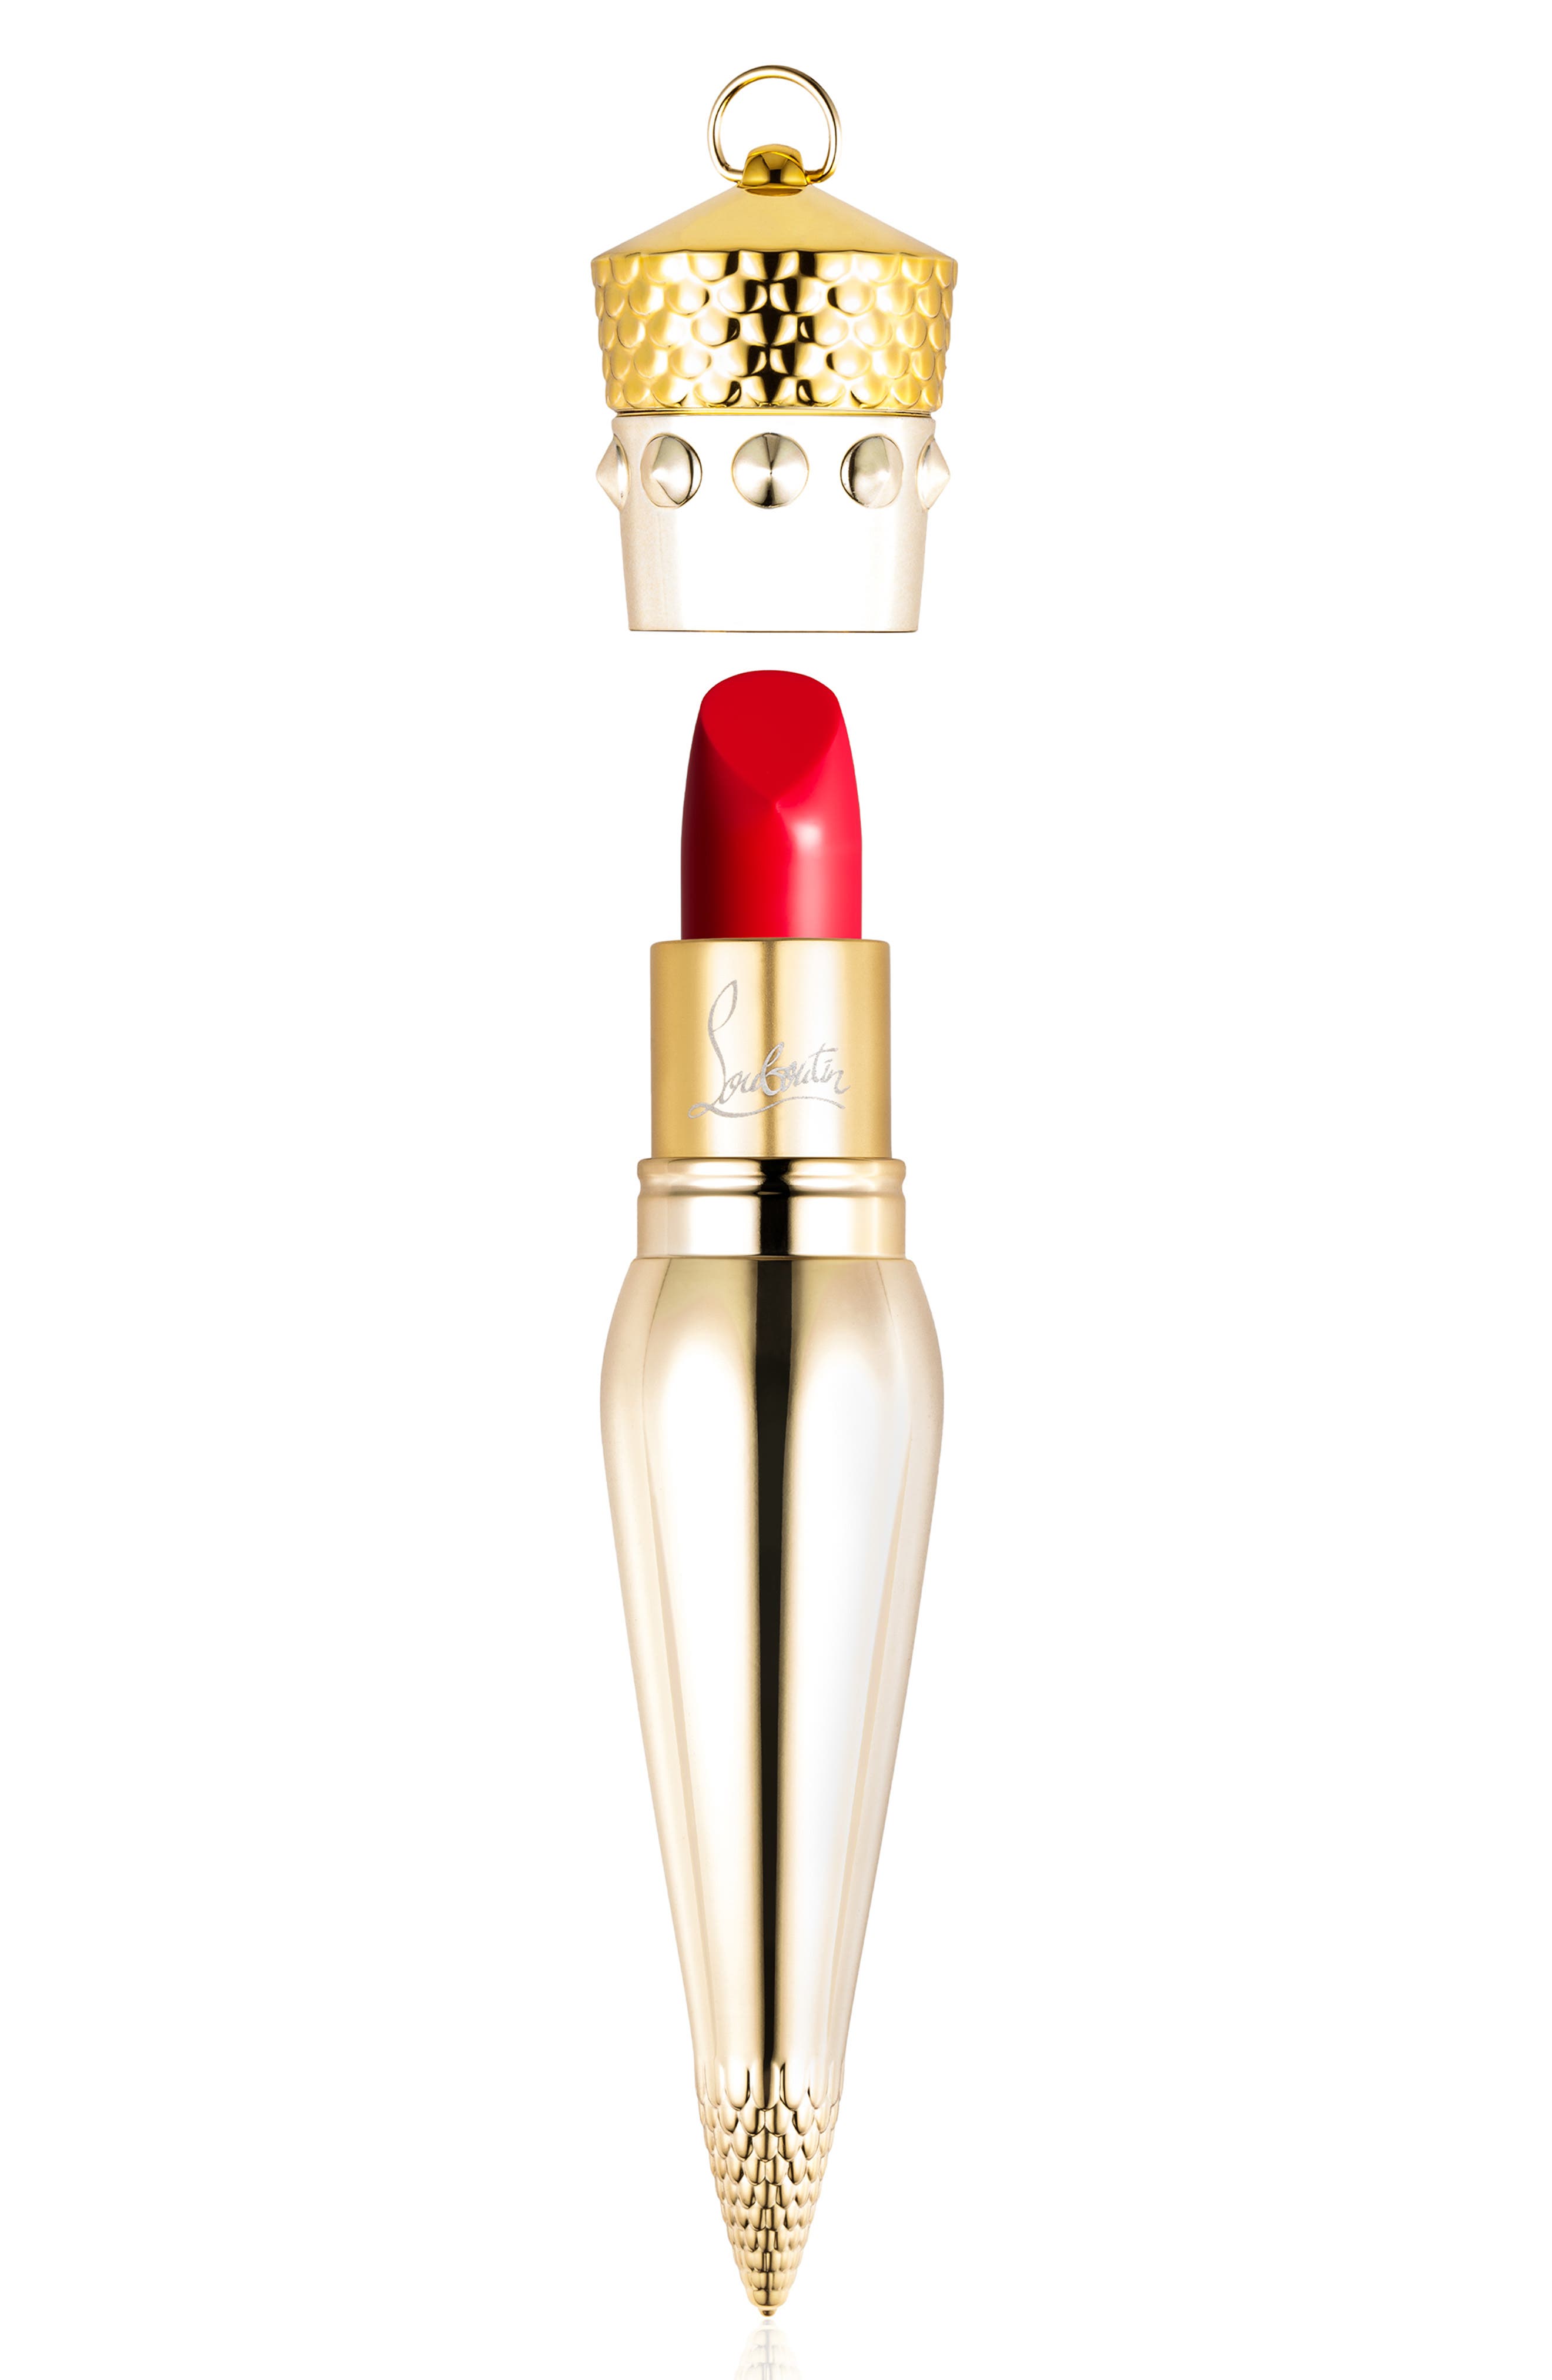 Christian Louboutin Silky Satin Lip Colour in Torerra 500 at Nordstrom